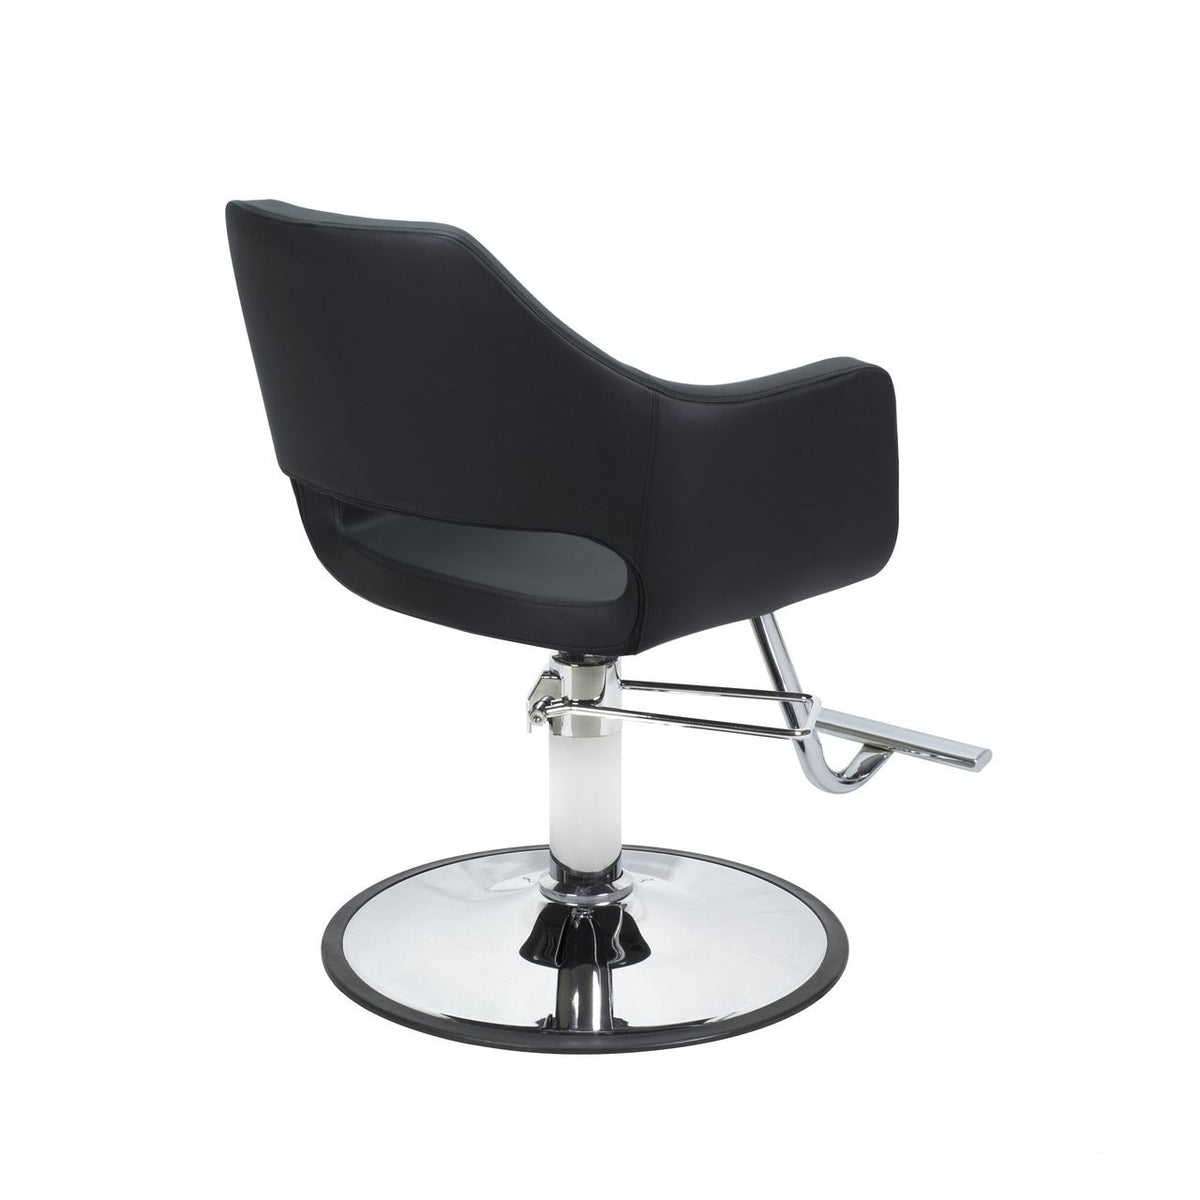 Berkeley Berkeley Richardson Styling Chair Styling Chair - ChairsThatGive